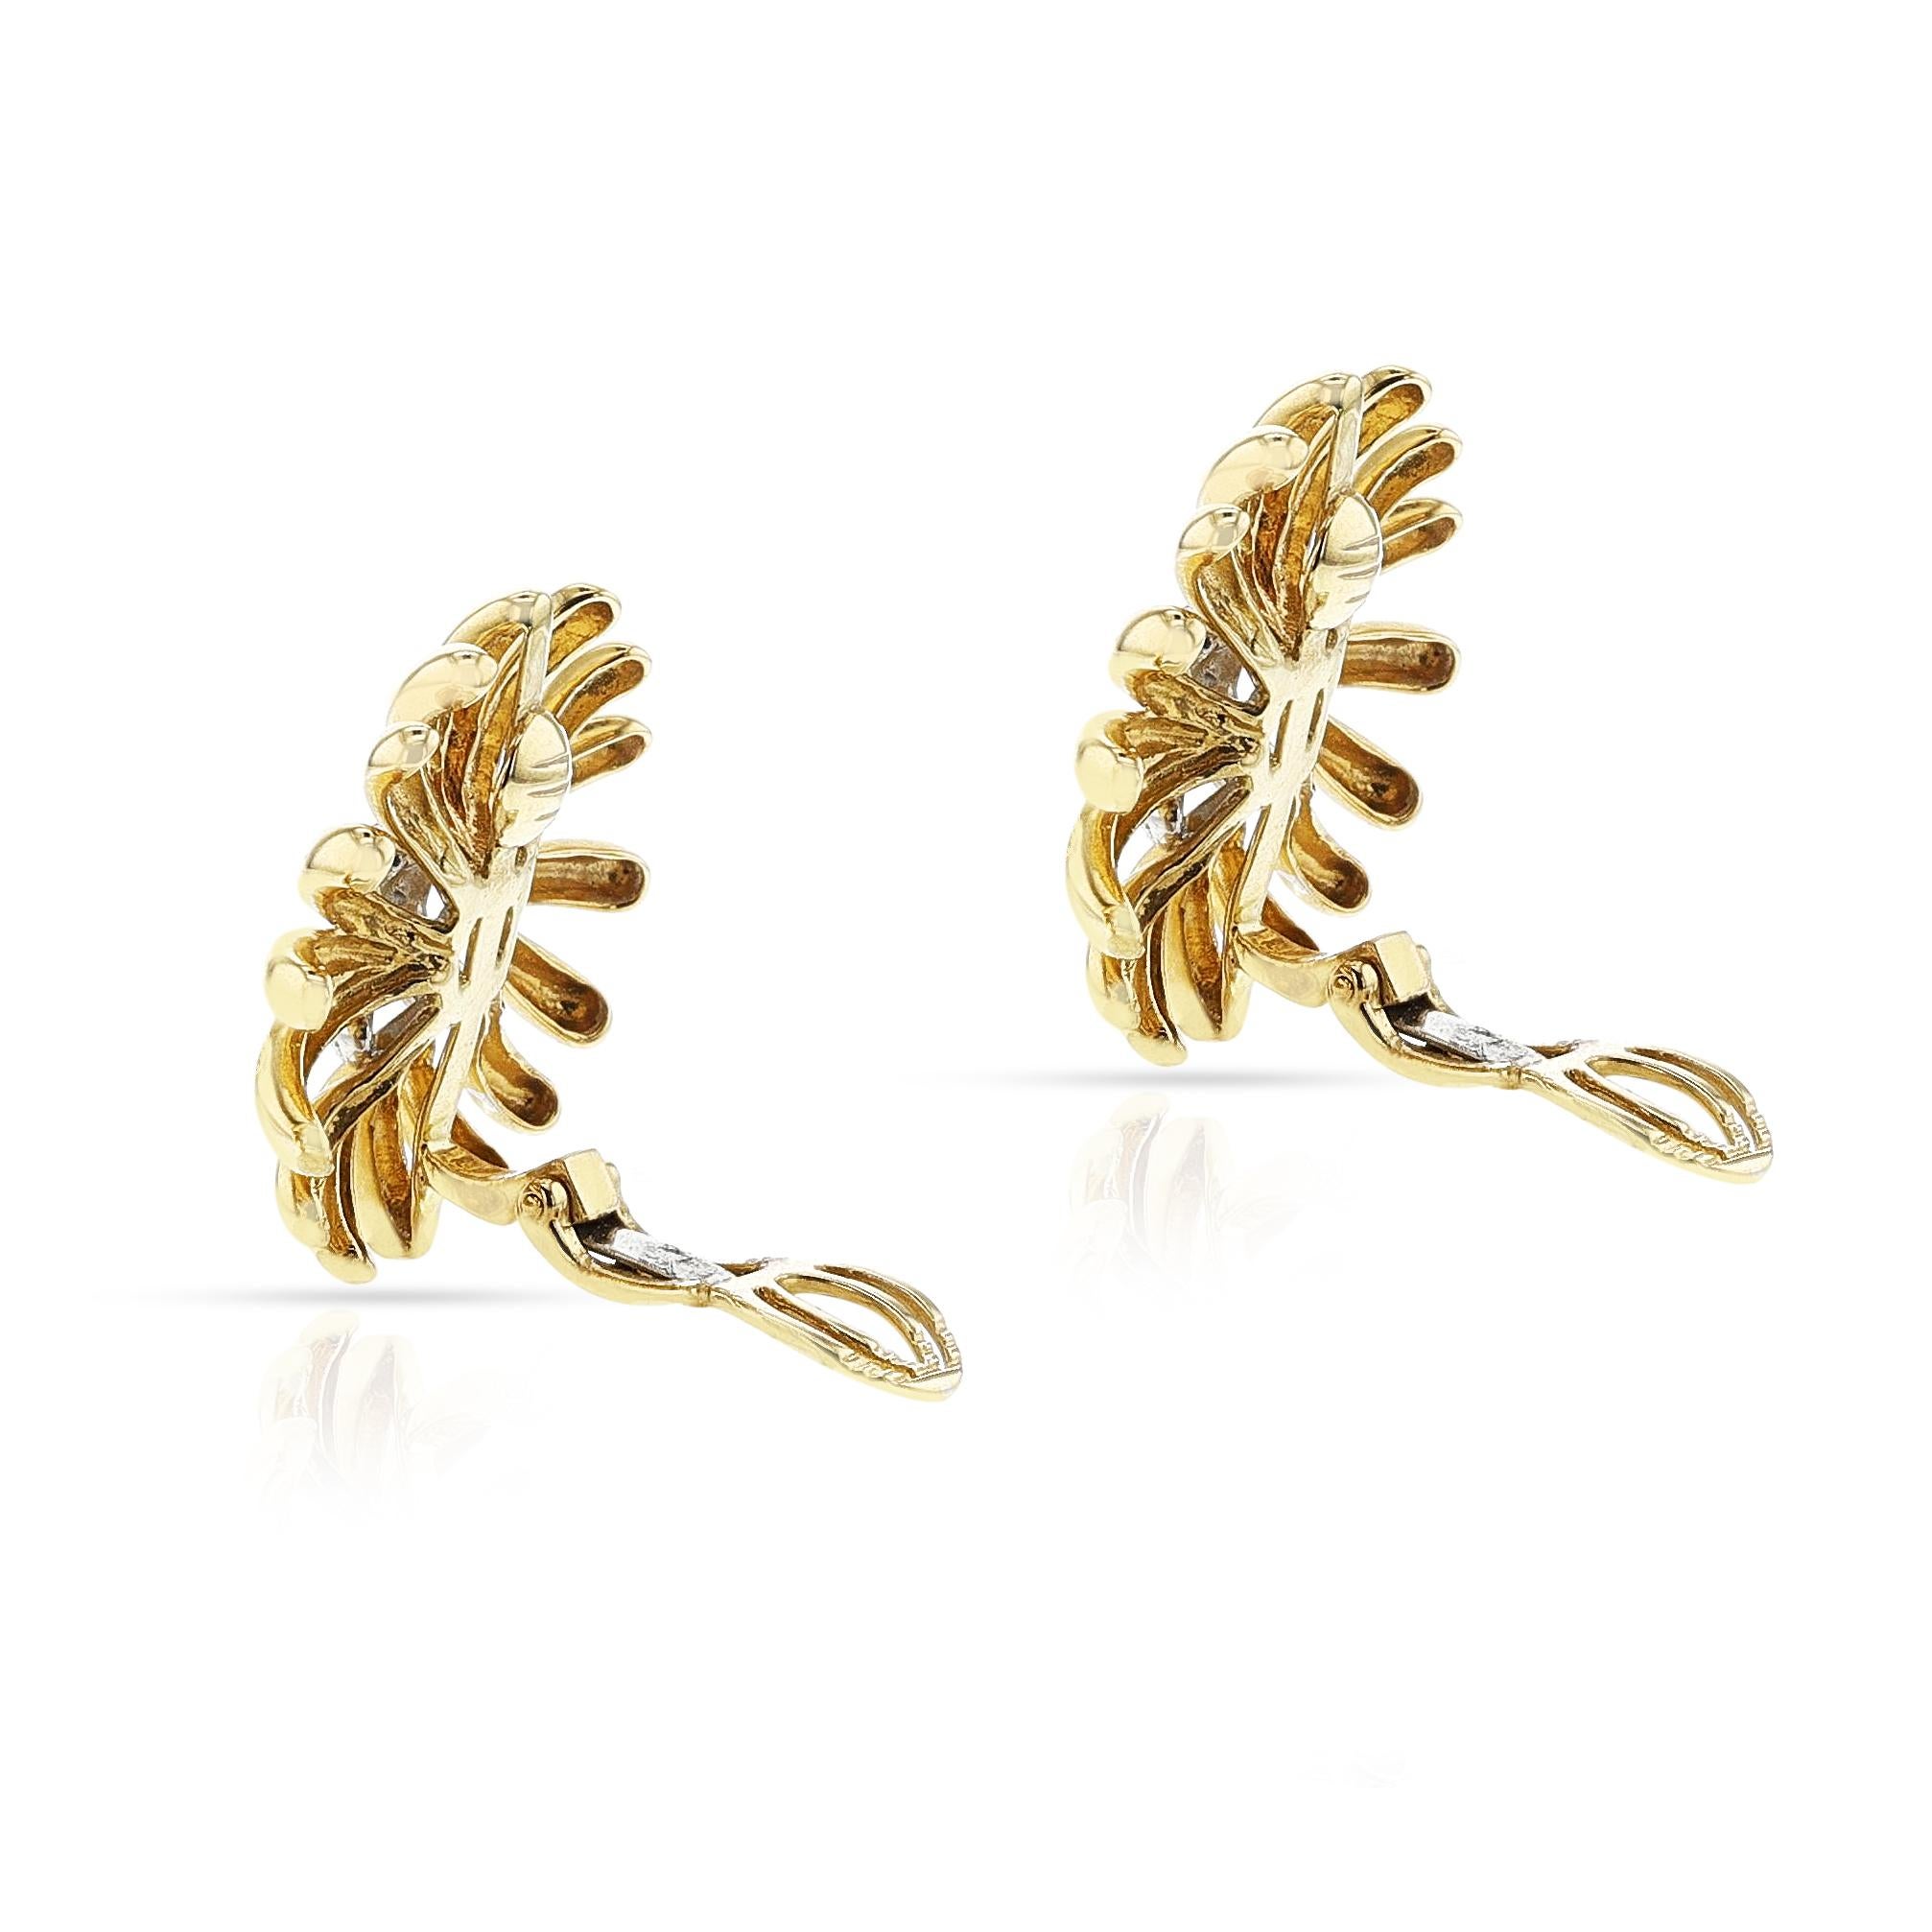 Gold and Diamond Flower Earrings, 18k In Excellent Condition For Sale In New York, NY